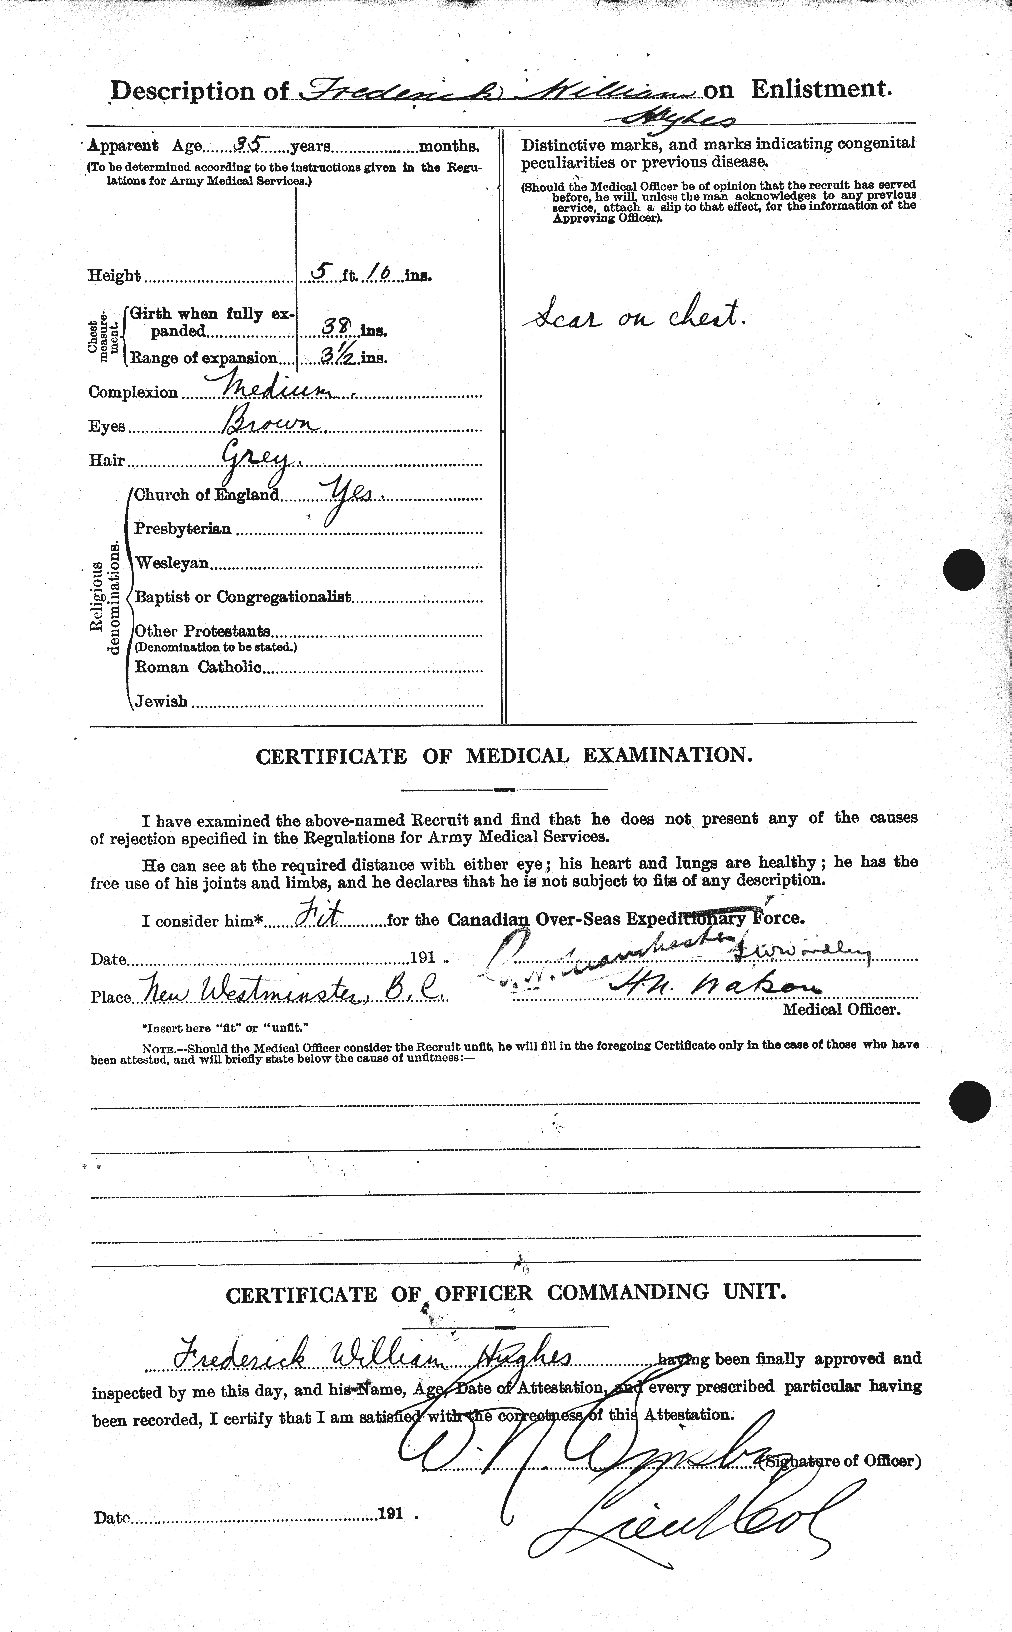 Personnel Records of the First World War - CEF 403805b